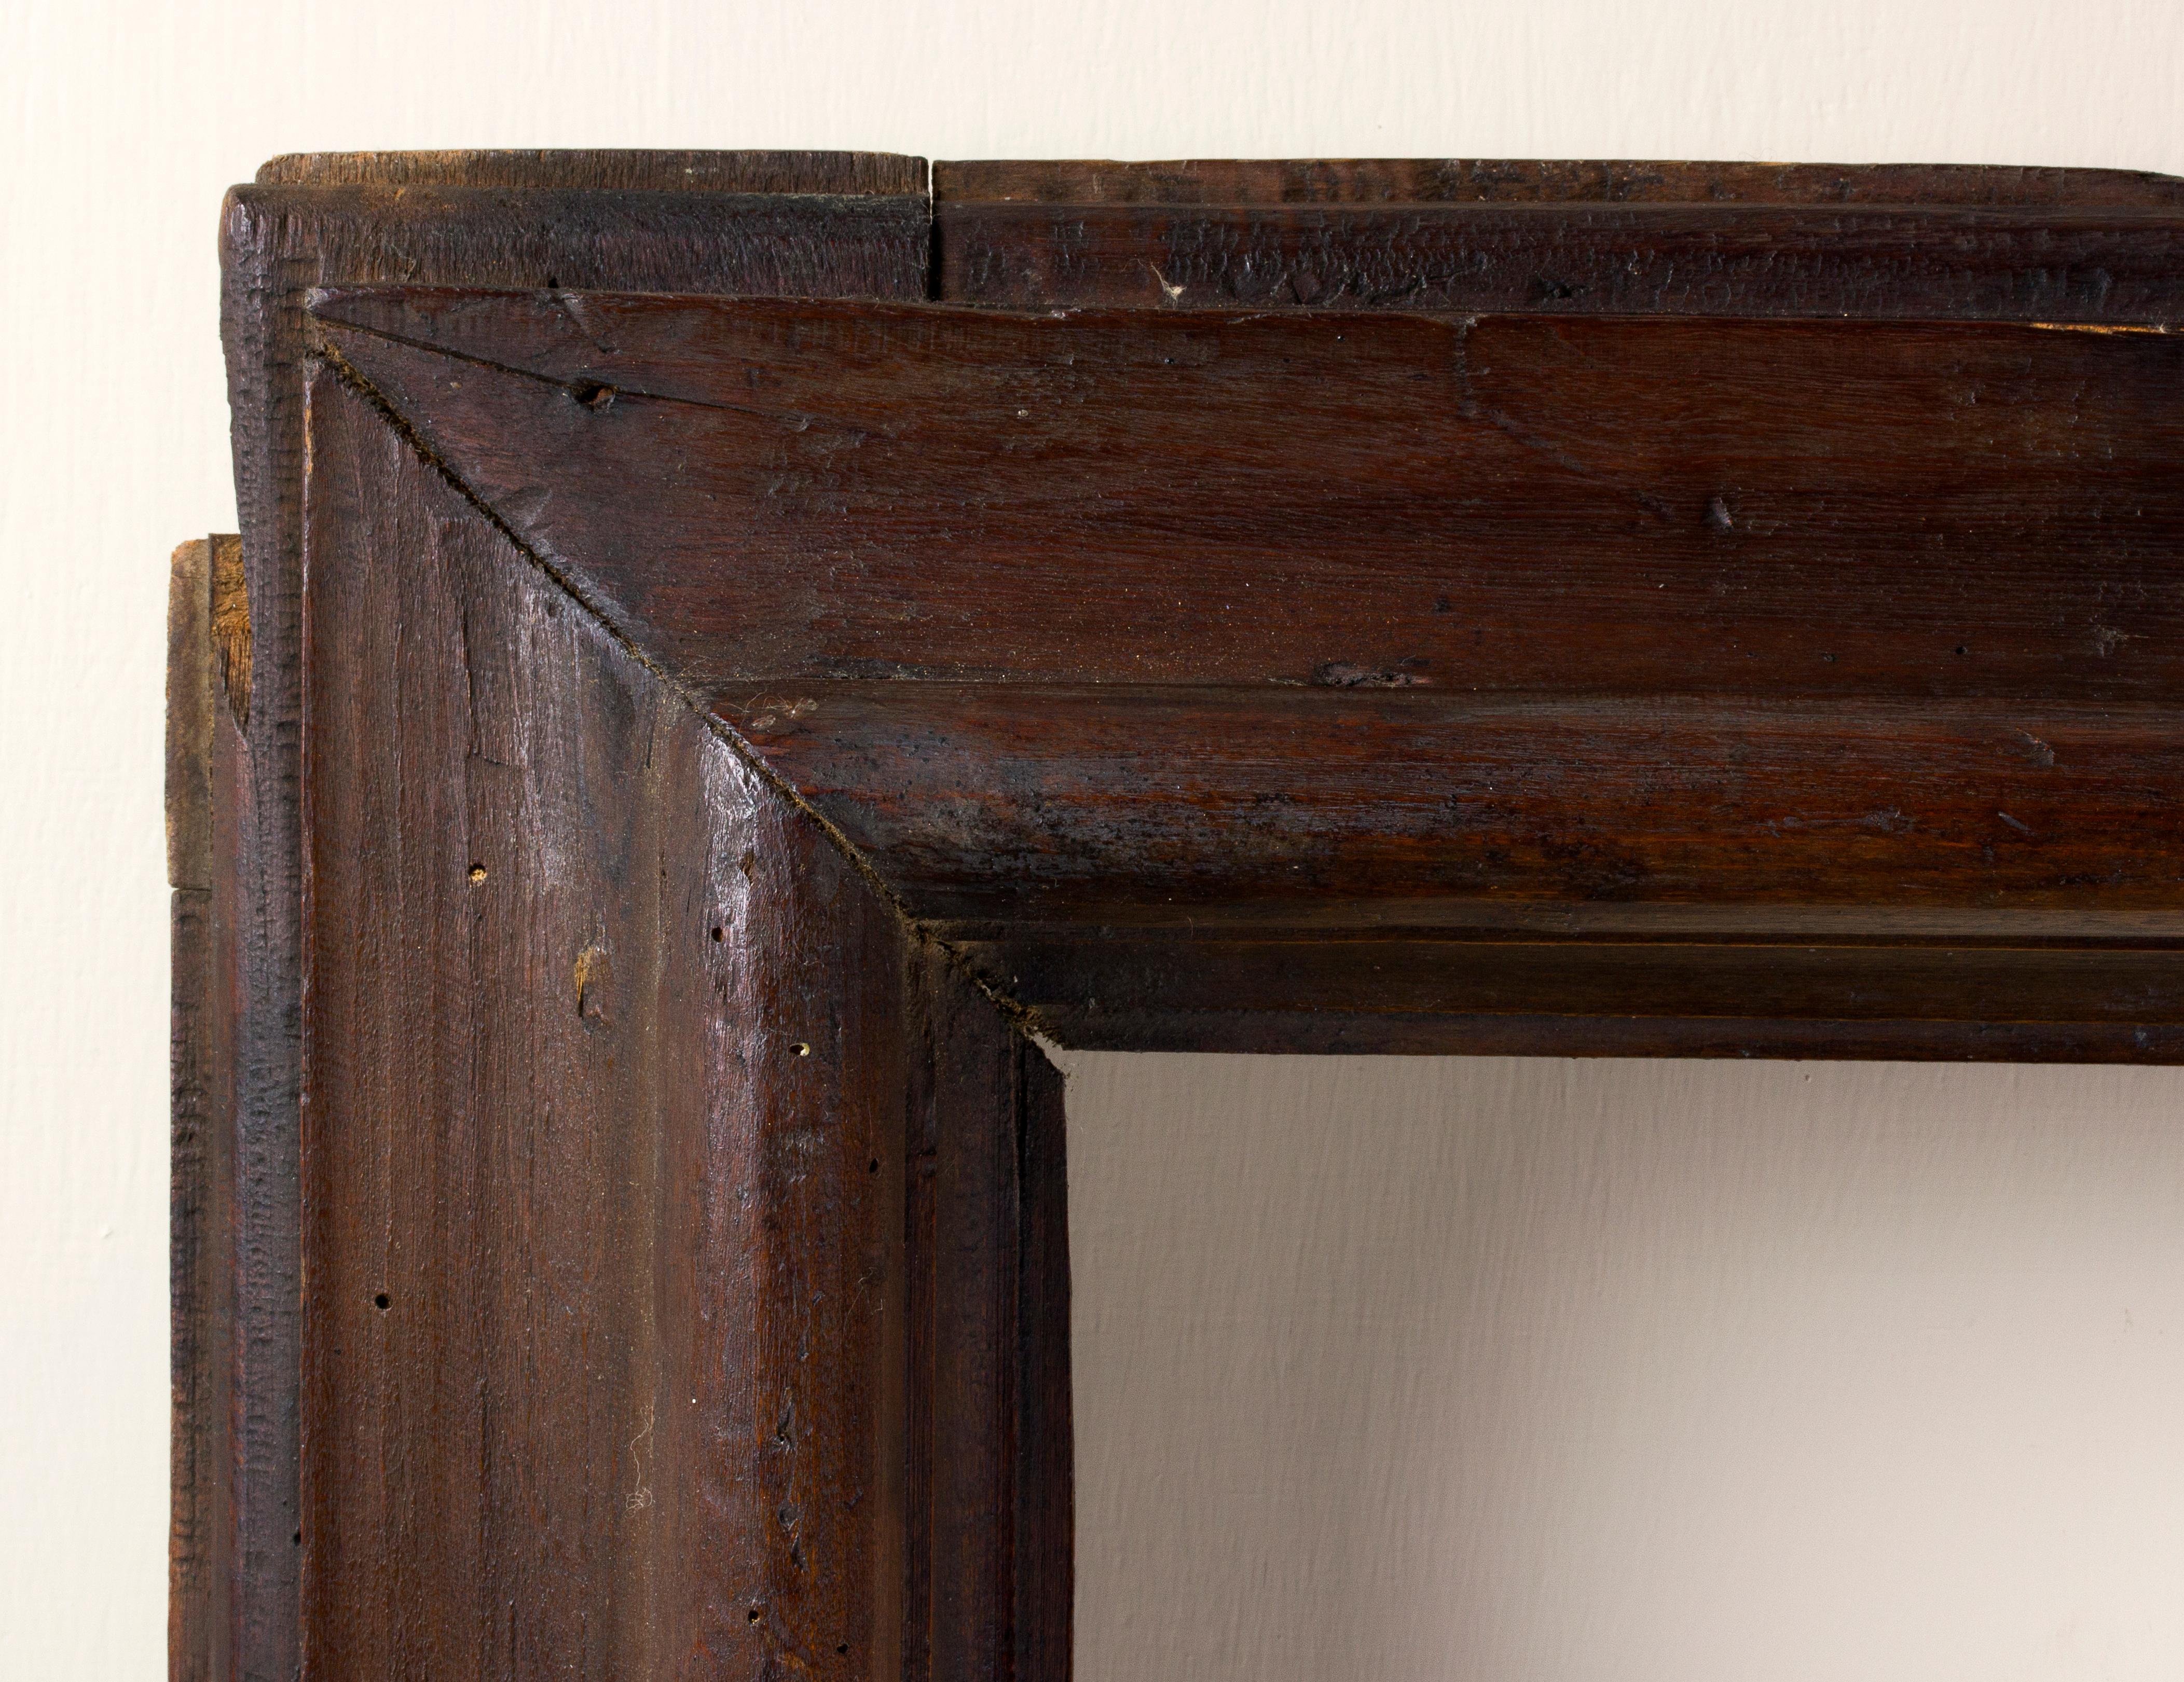 Central Italy, second half of the 17th century
Natural wood frame with mixtilinear profile.
Inside: 90.8 x 68.8 cm; outside: 108 x 85.5 cm.
Depth is the wide of the band.
 